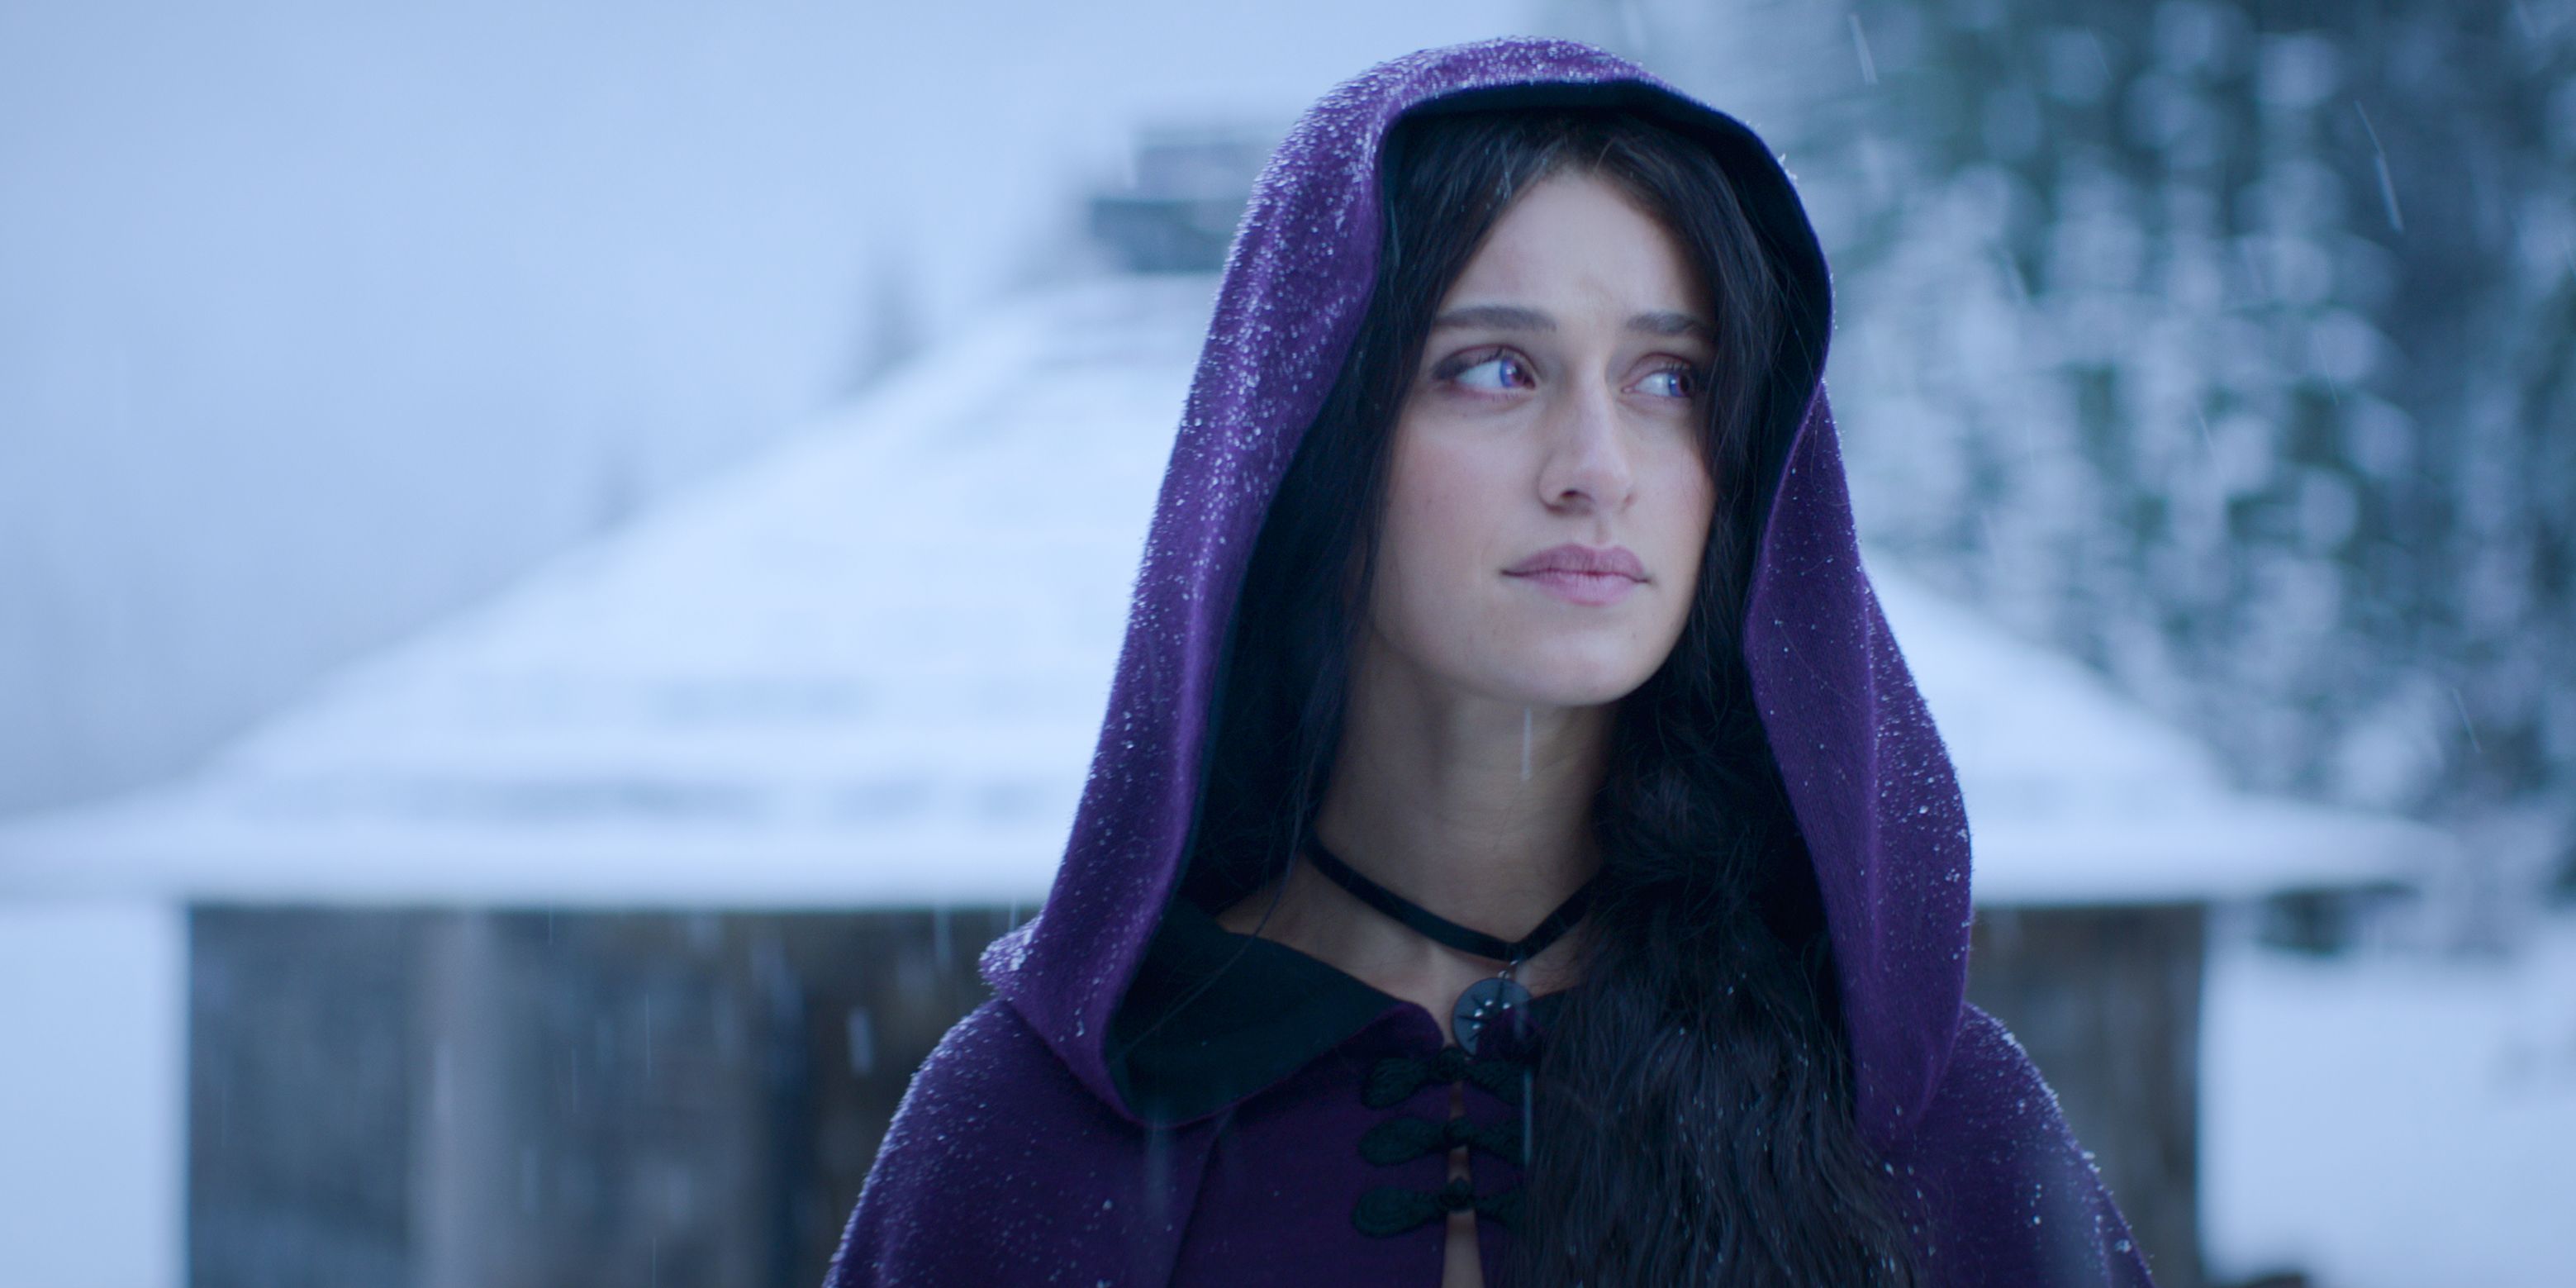 The Witcher: Who is Yennefer of Vengerberg?